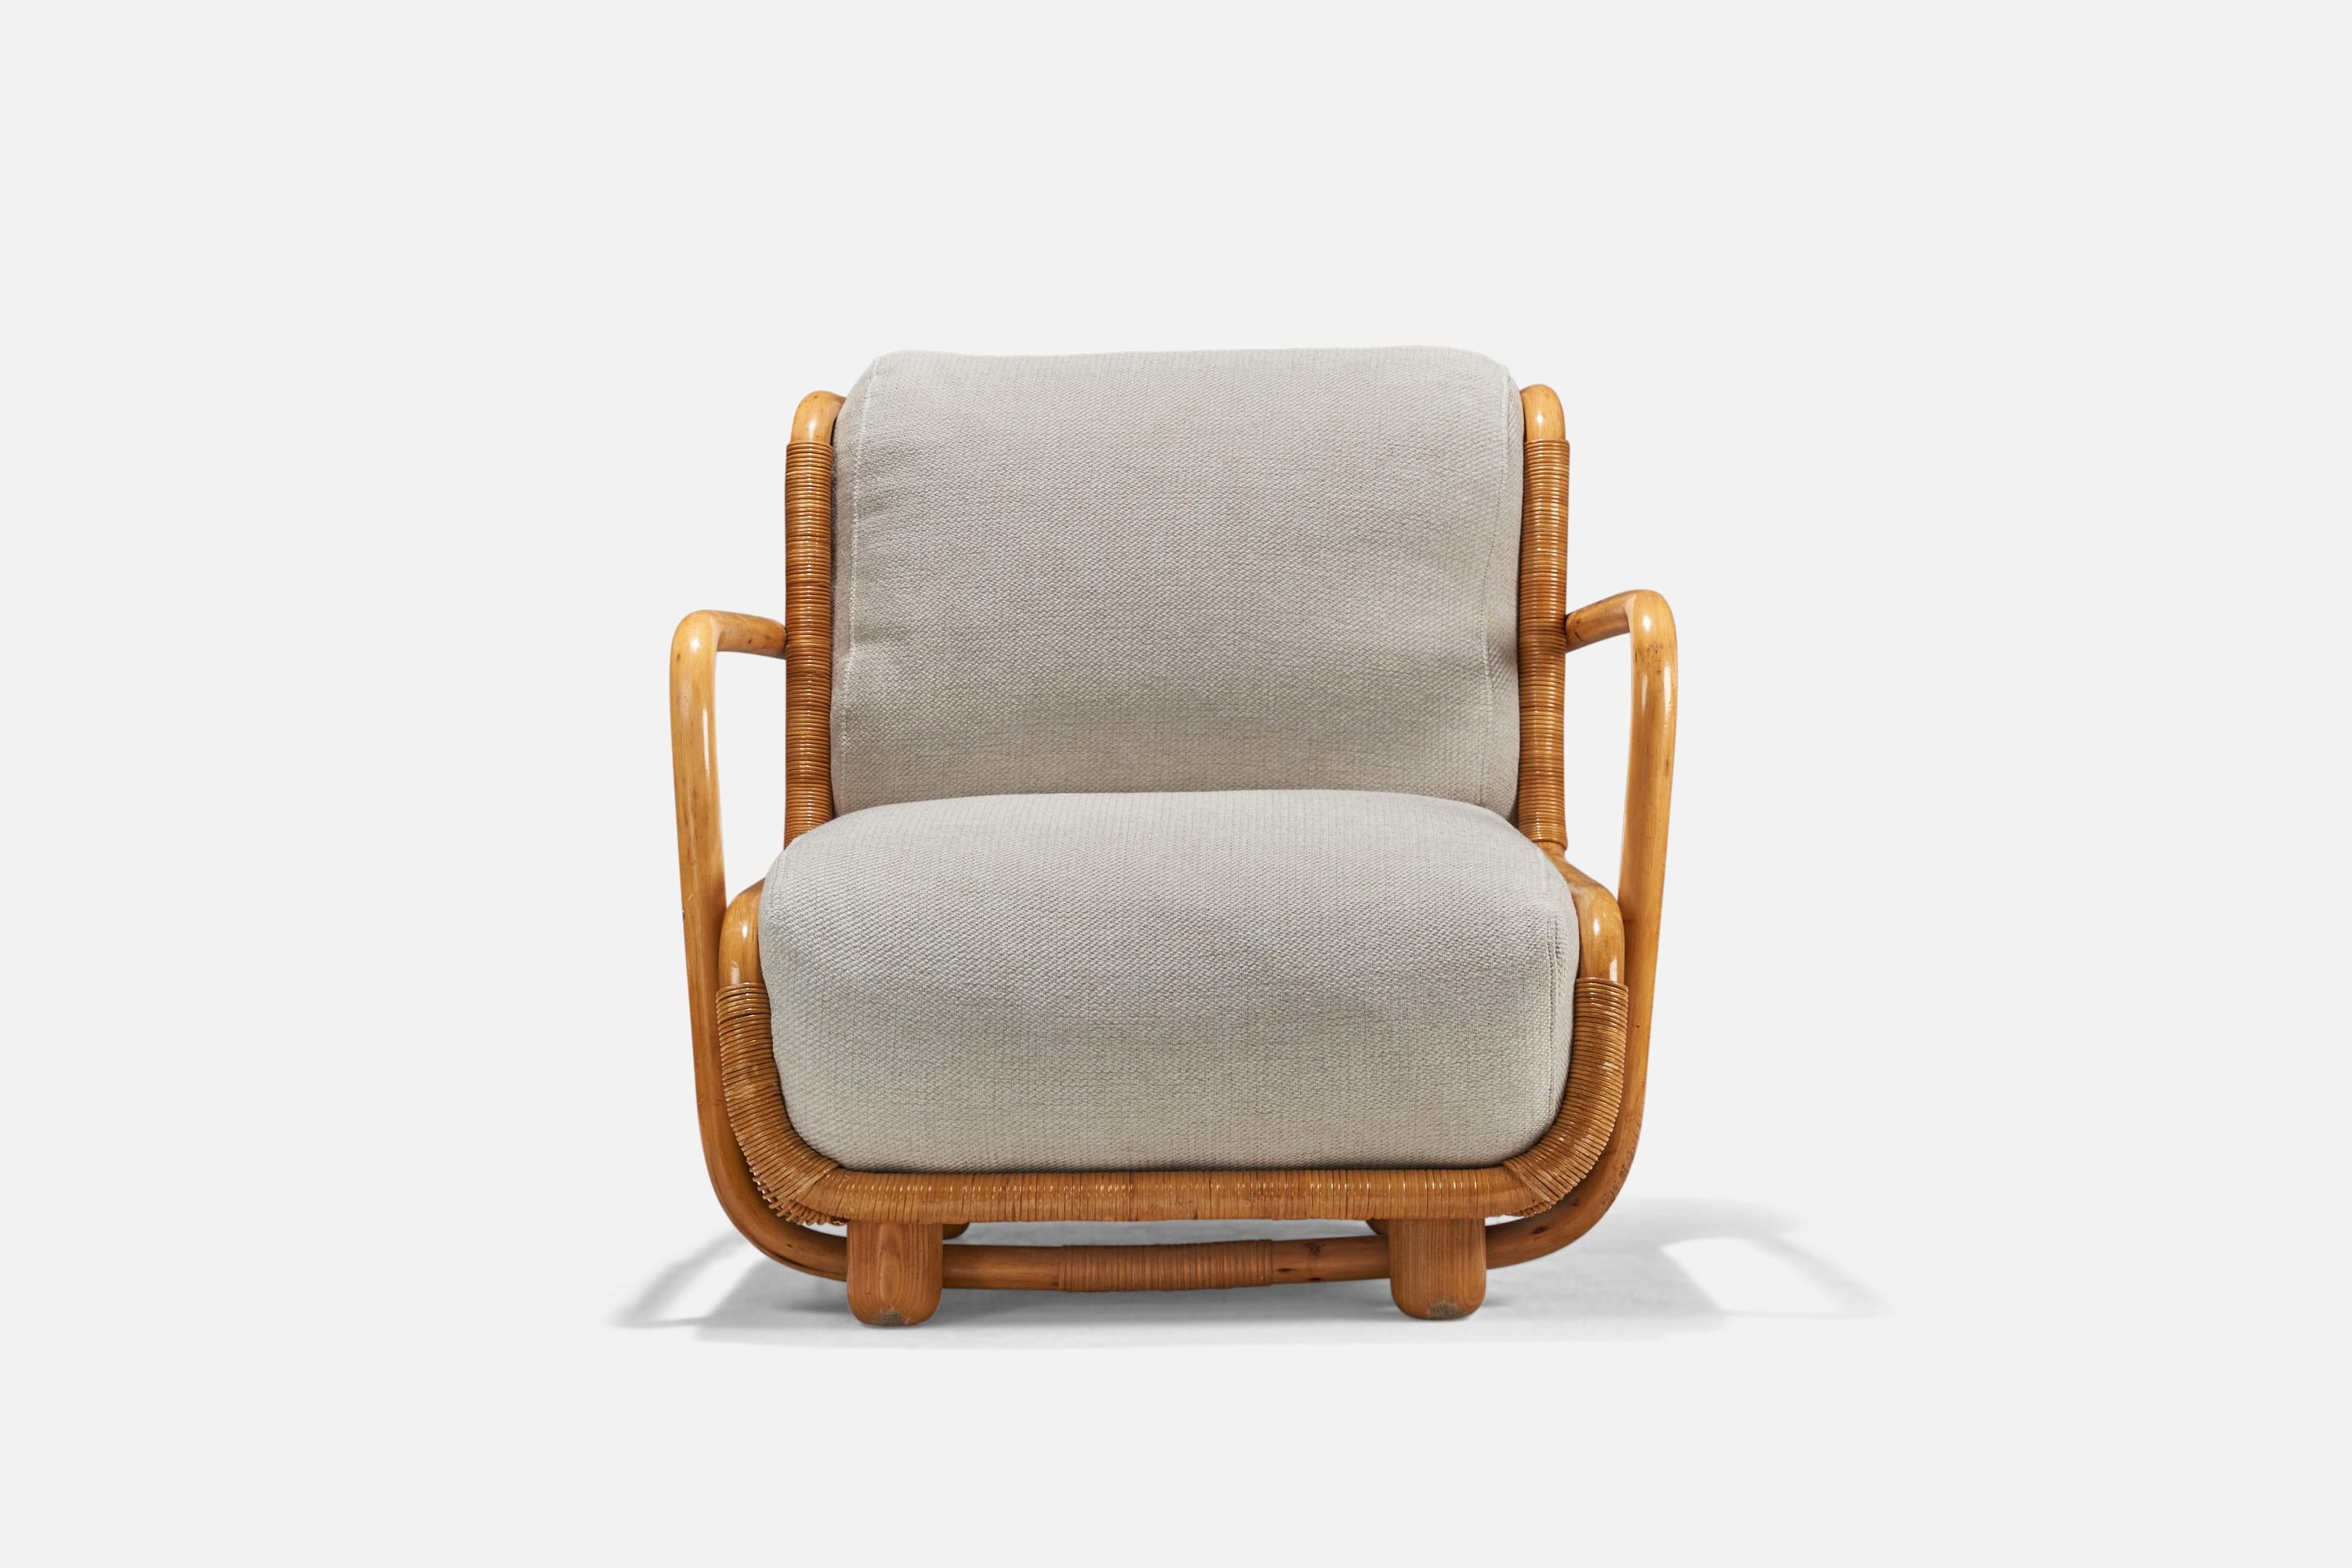 Mid-20th Century Paolo Buffa Attribution, Lounge Chairs, Wood, Rattan, Fabric, Italy, 1940s